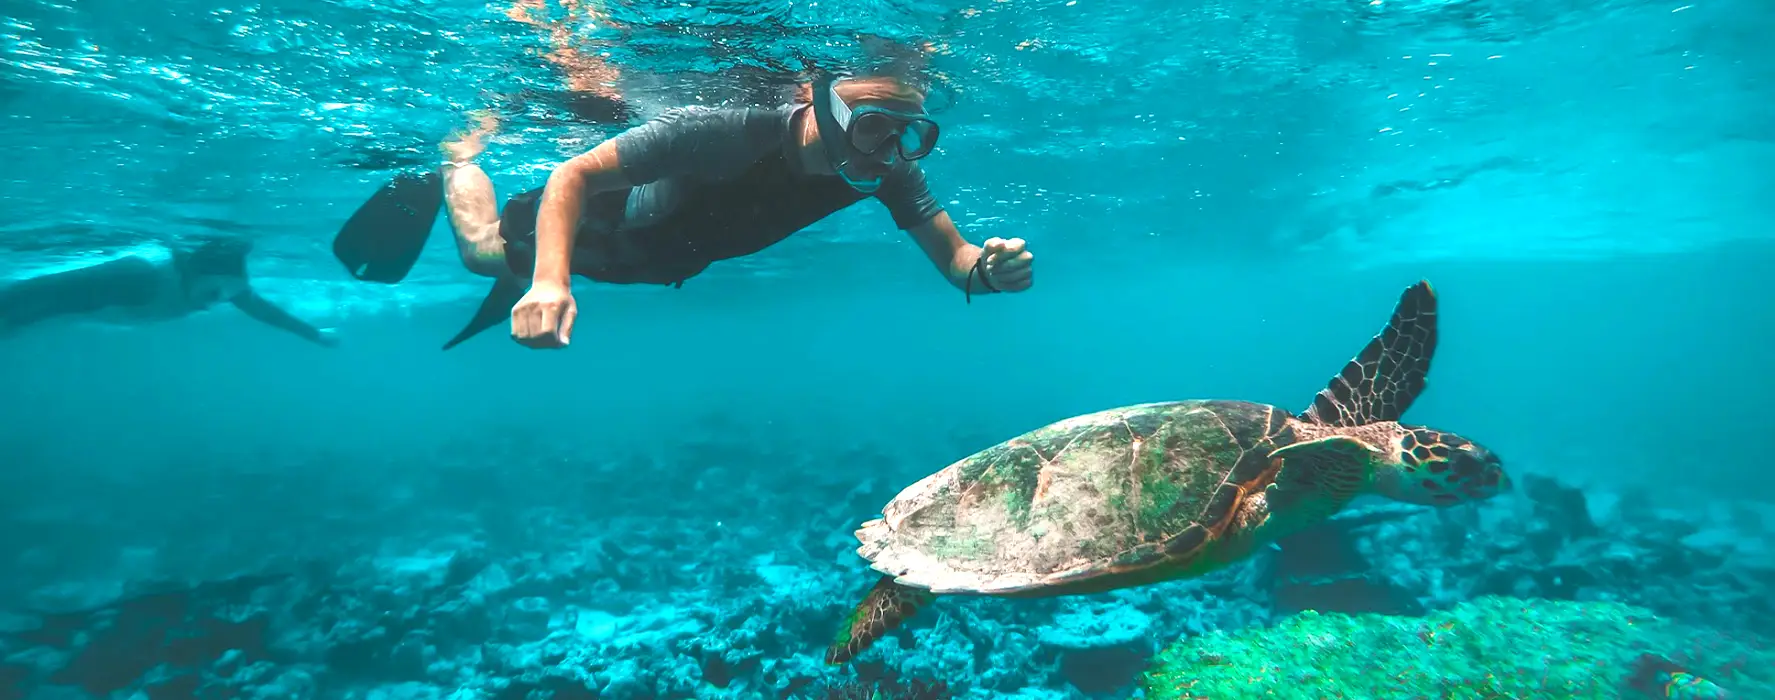 A underwater photo of a student snorkeling with a turtle.